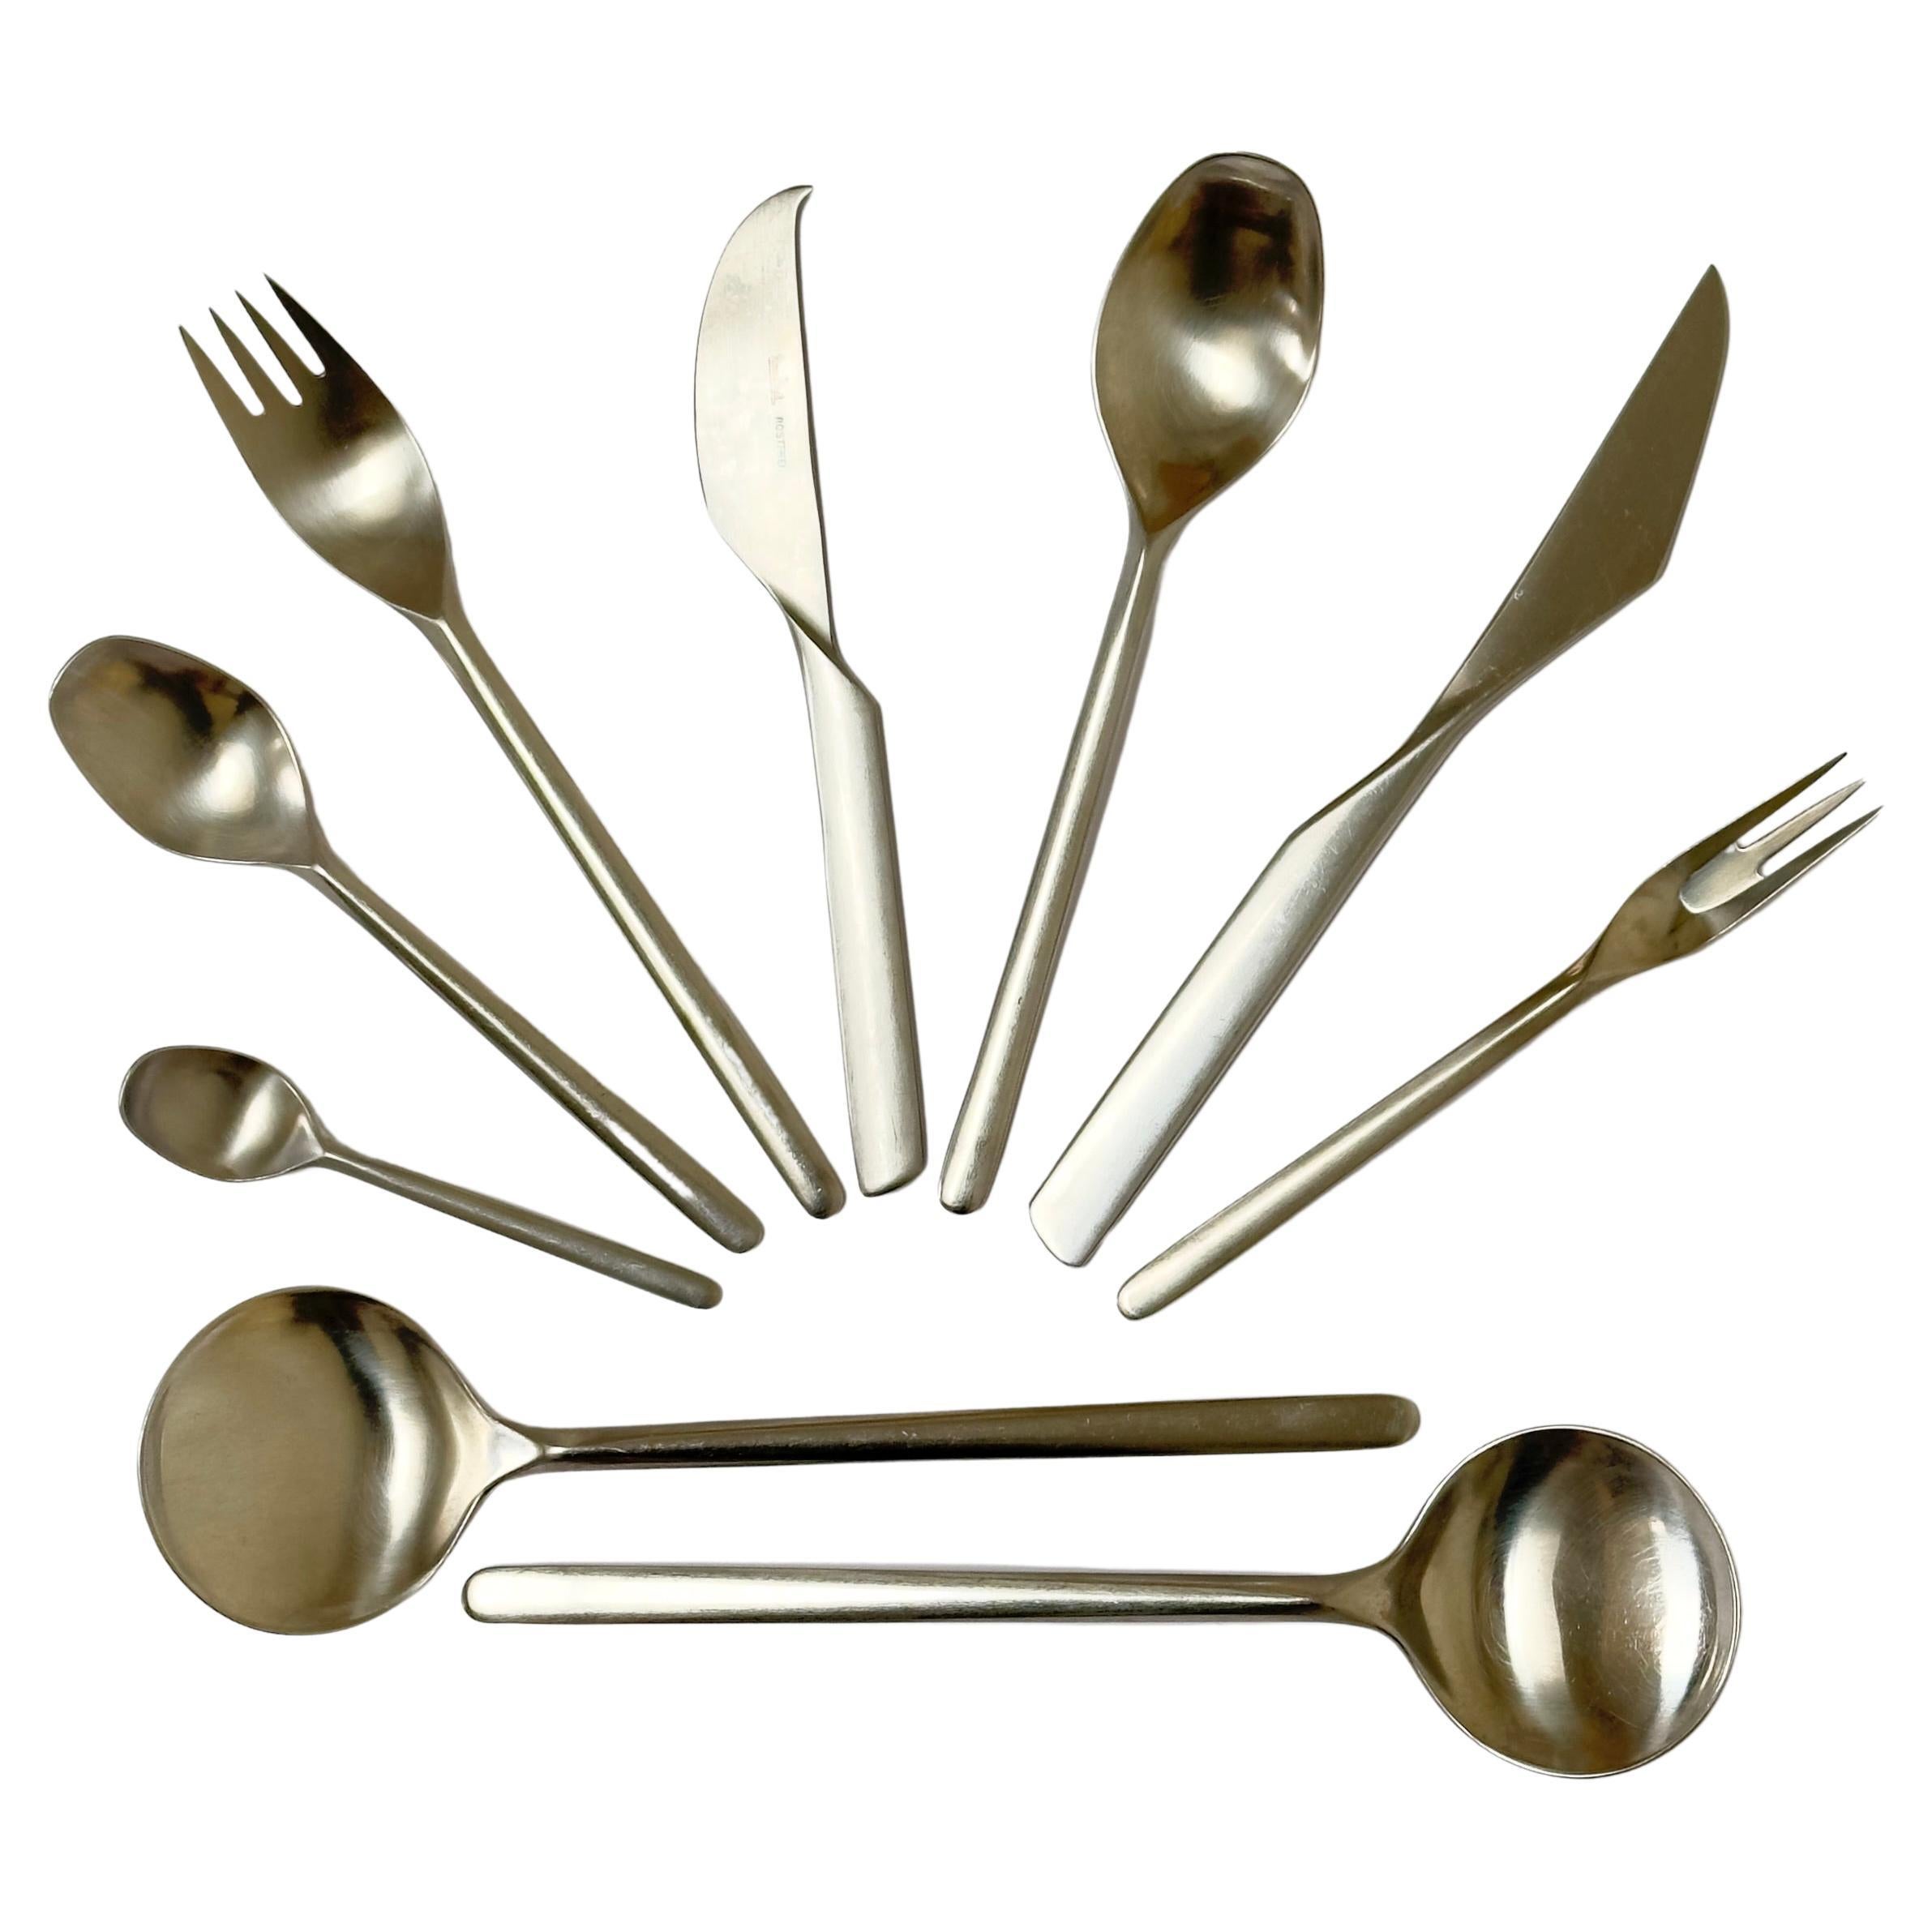 Composition Cutlery Set, Tapio Wirkkala for Rosenthal, Germany 1963